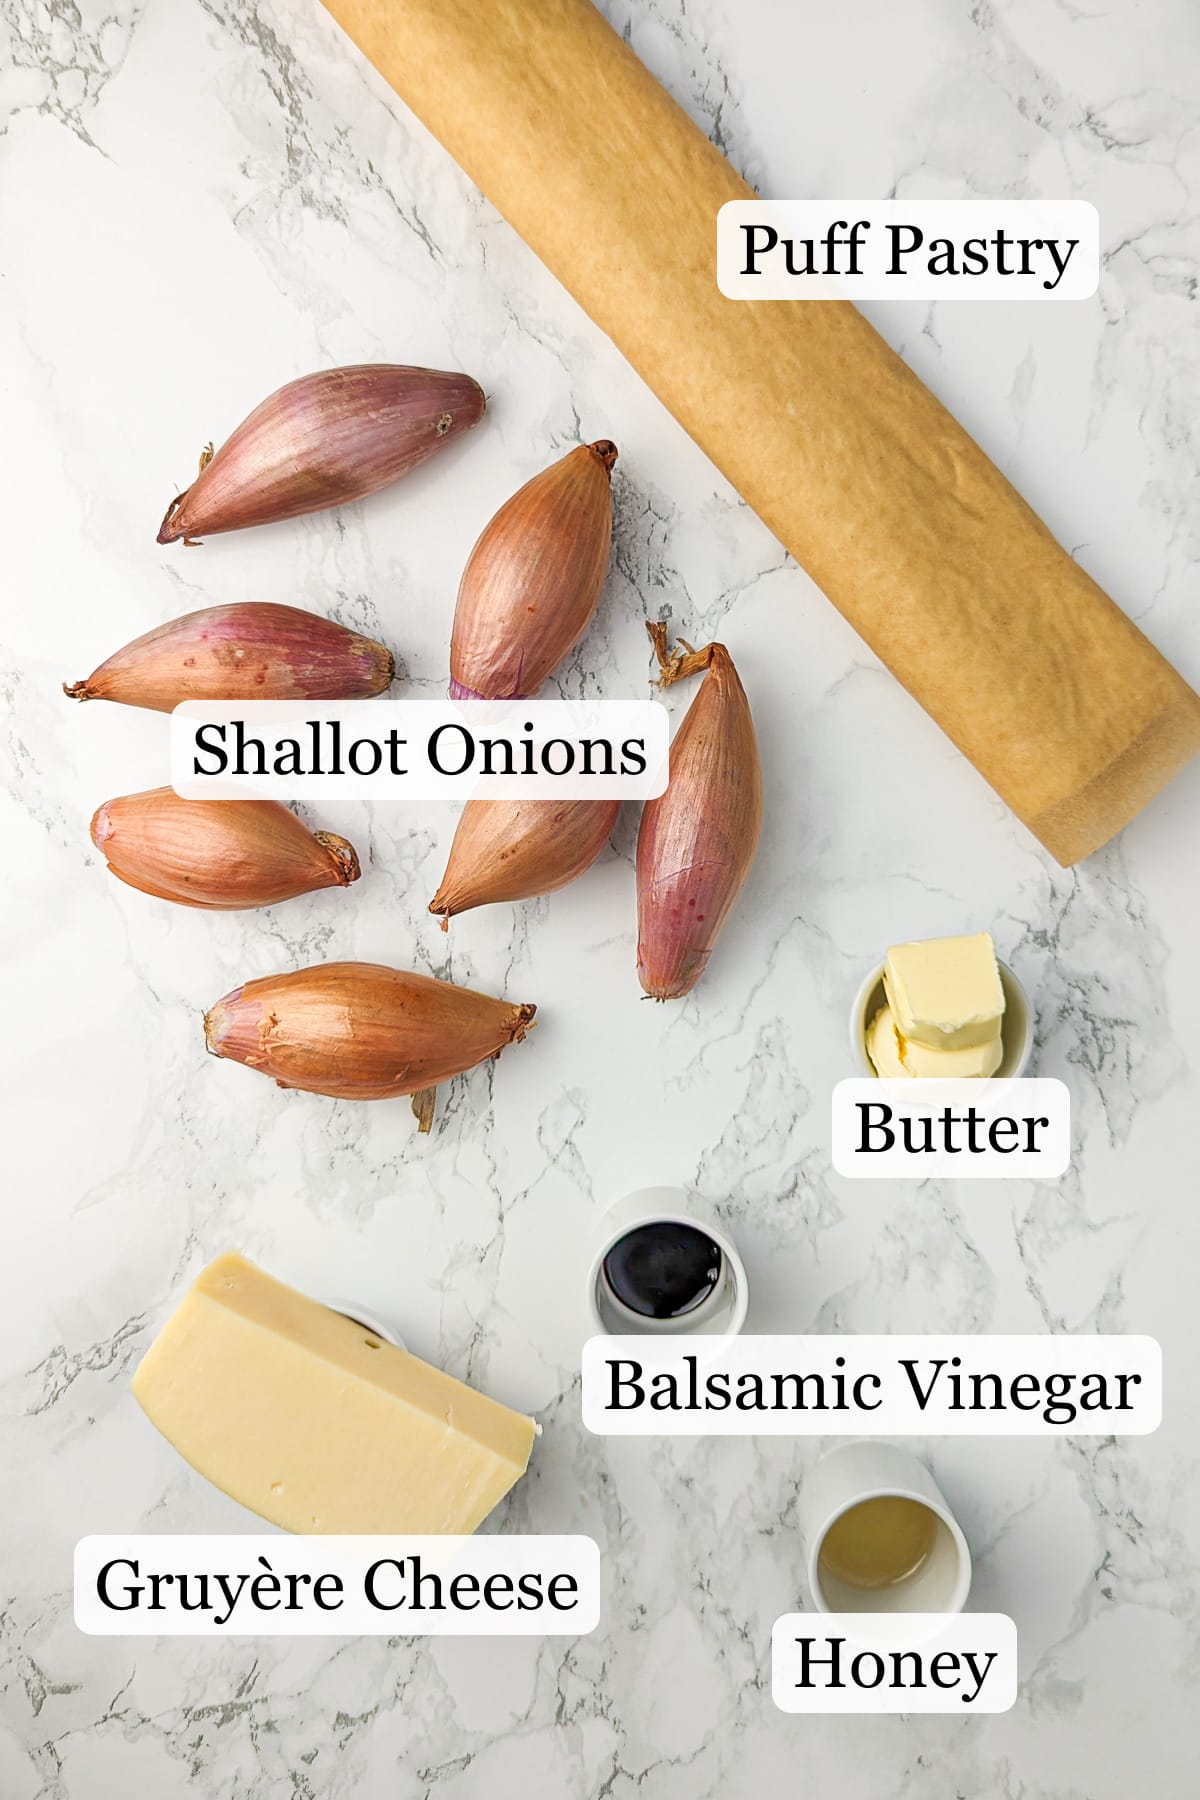 Assorted ingredients for caramelized onion tart on marble background, including shallots, pastry dough, butter, and balsamic vinegar.